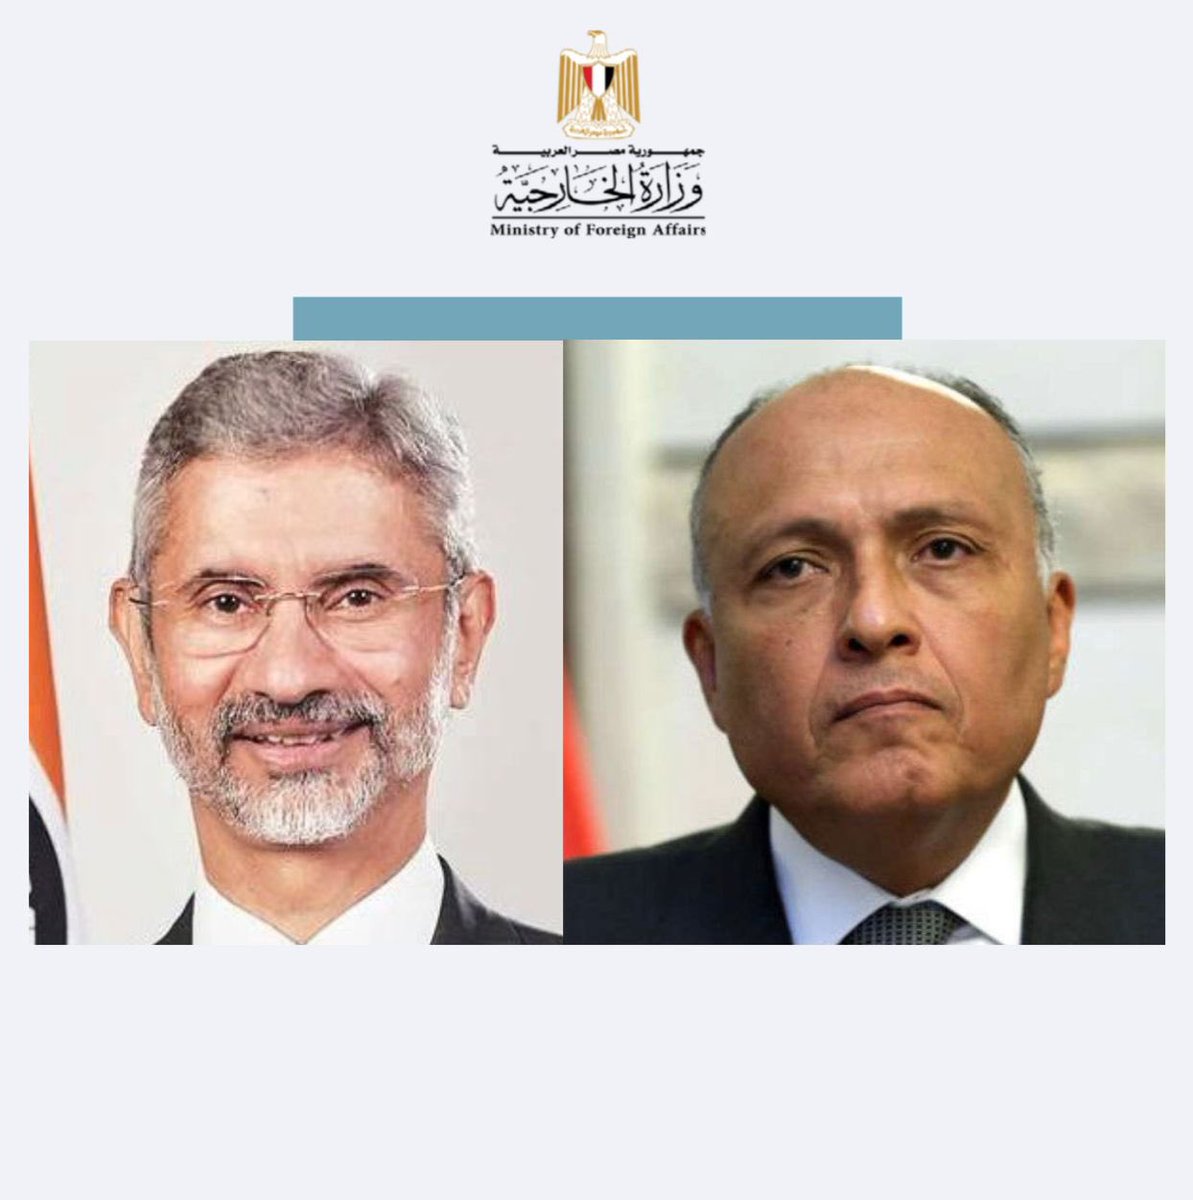 Follow the press conference of the foreign ministers of Egypt and India live on the Twitter account of MFA Spokesperson at noon today @IndianDiplomacy @DrSJaishankar @indembcairo